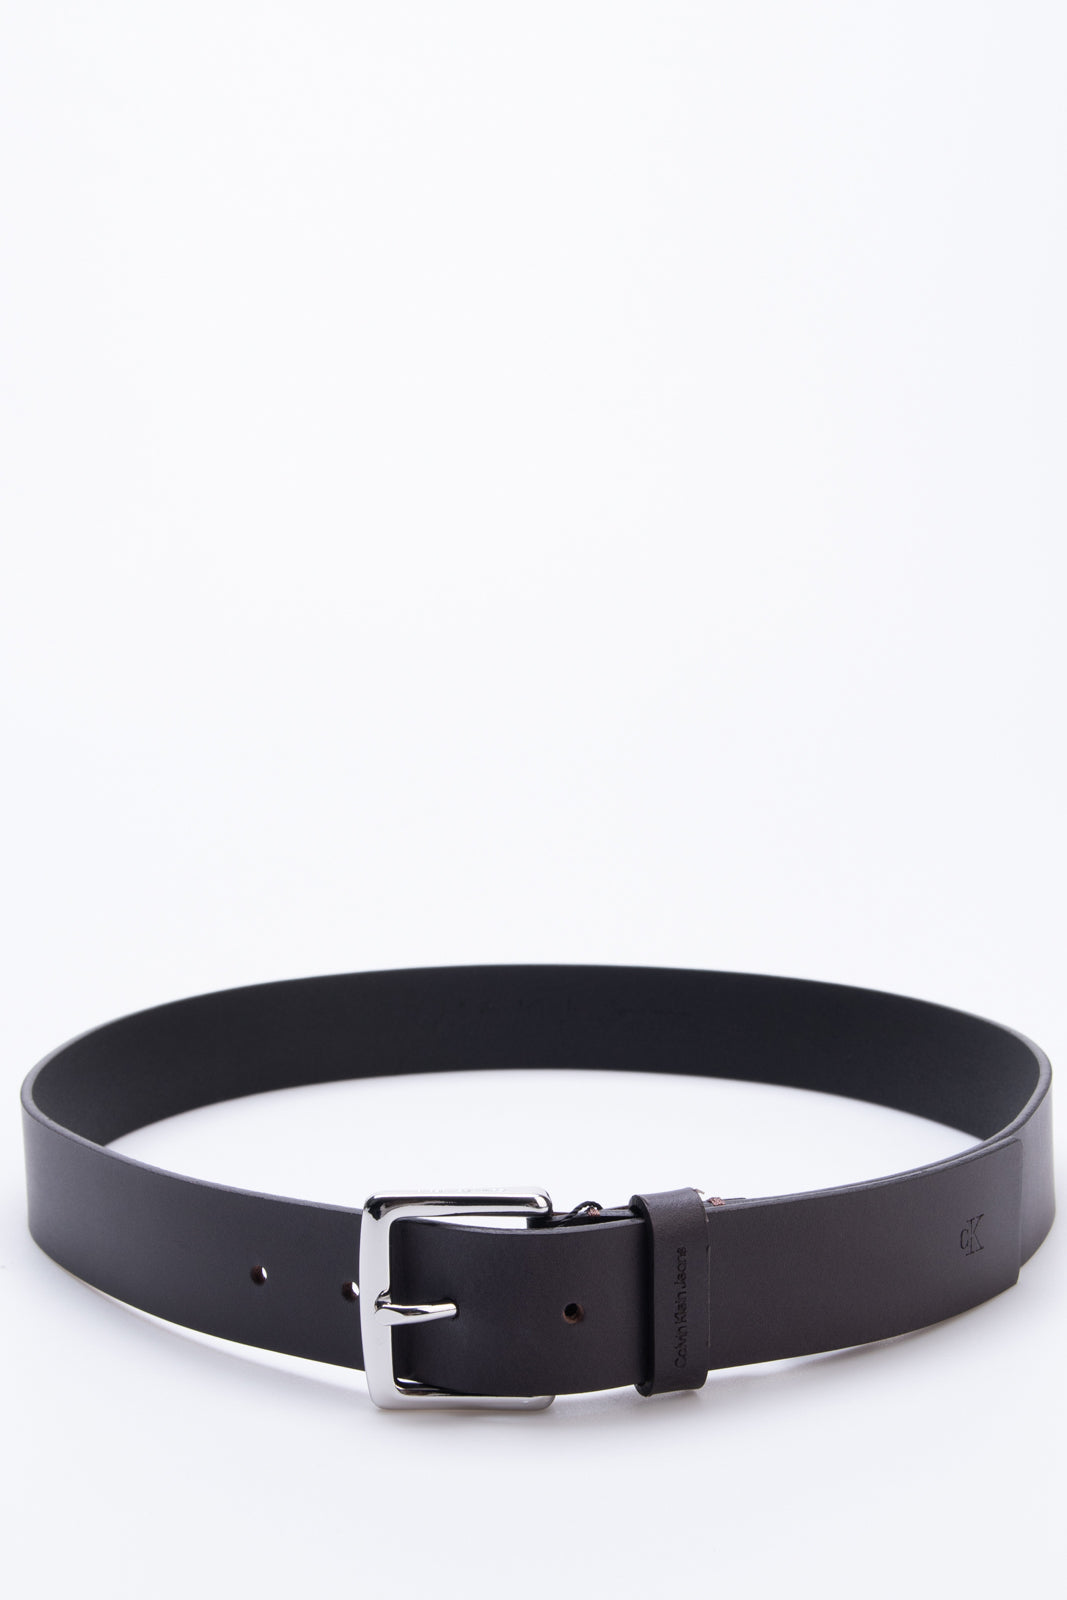 CALVIN KLEIN JEANS Leather Classic Belt Size 95/38 Debossed Logo Two Tone gallery main photo